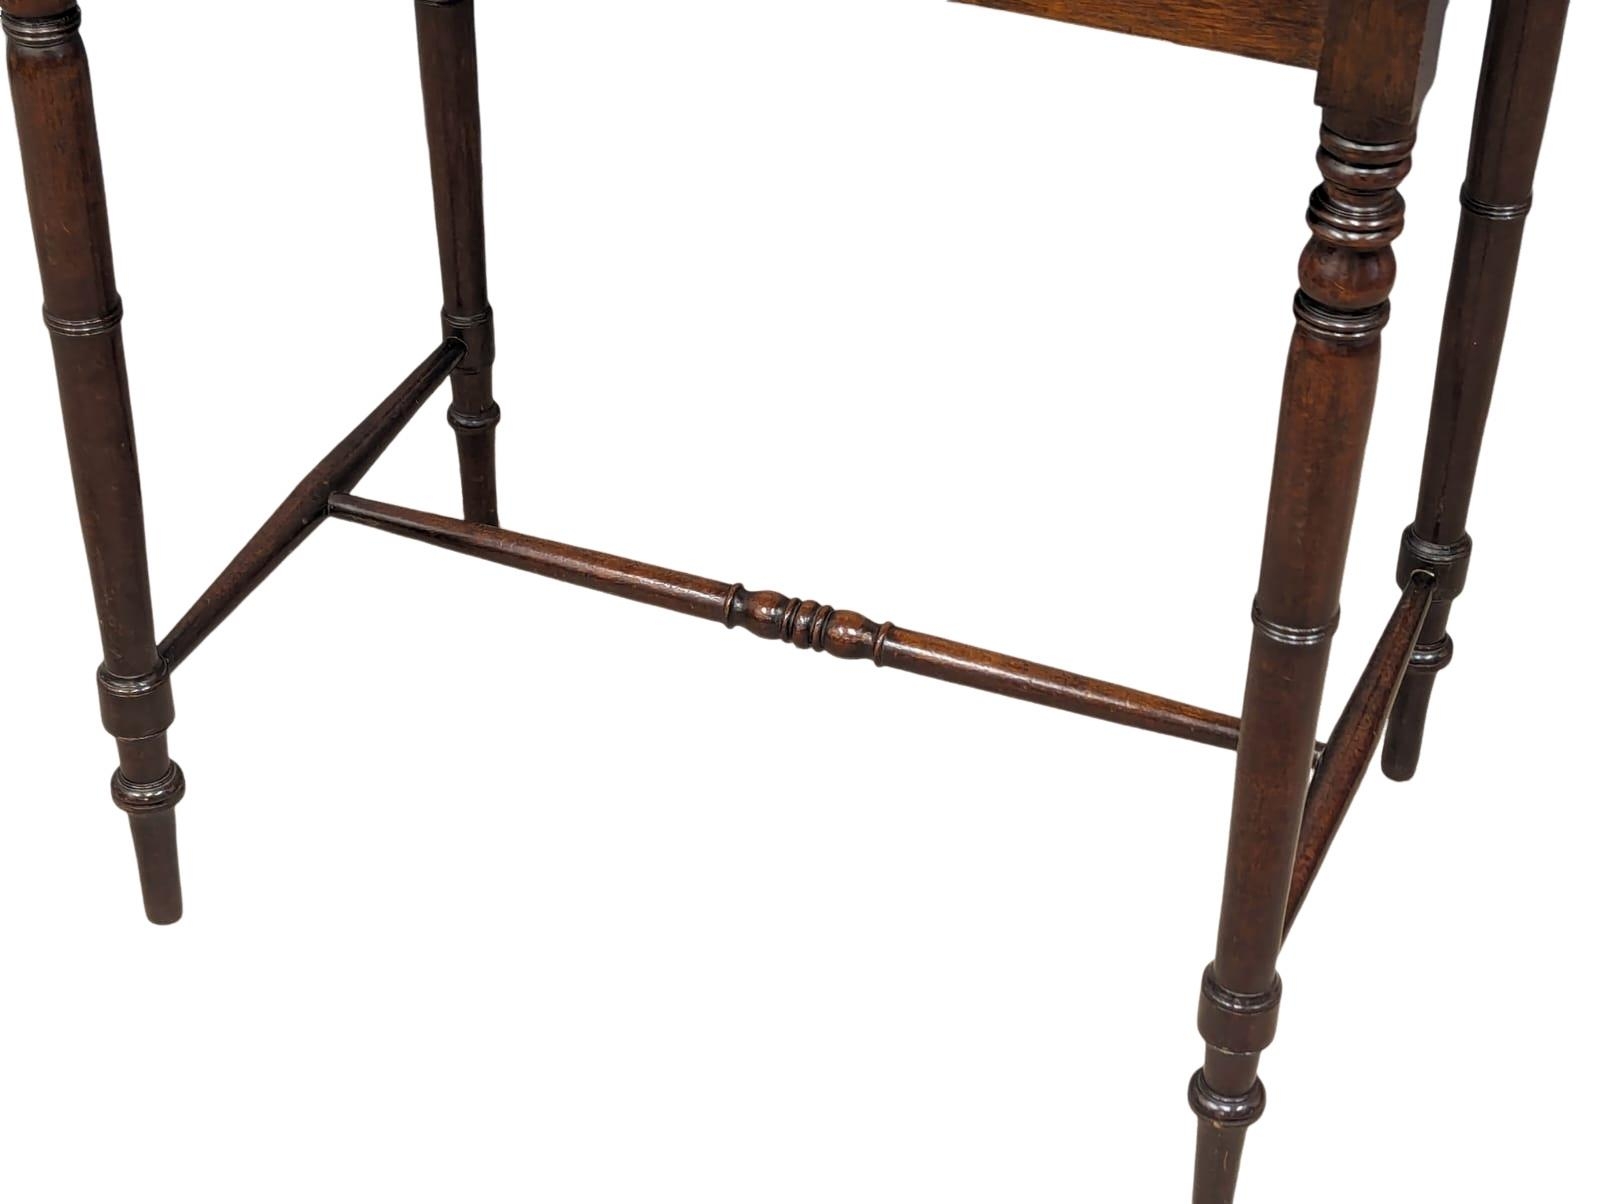 A William IV mahogany side table with turned supports and stretcher. Circa 1830-1835. 70x44x74cm - Image 3 of 4